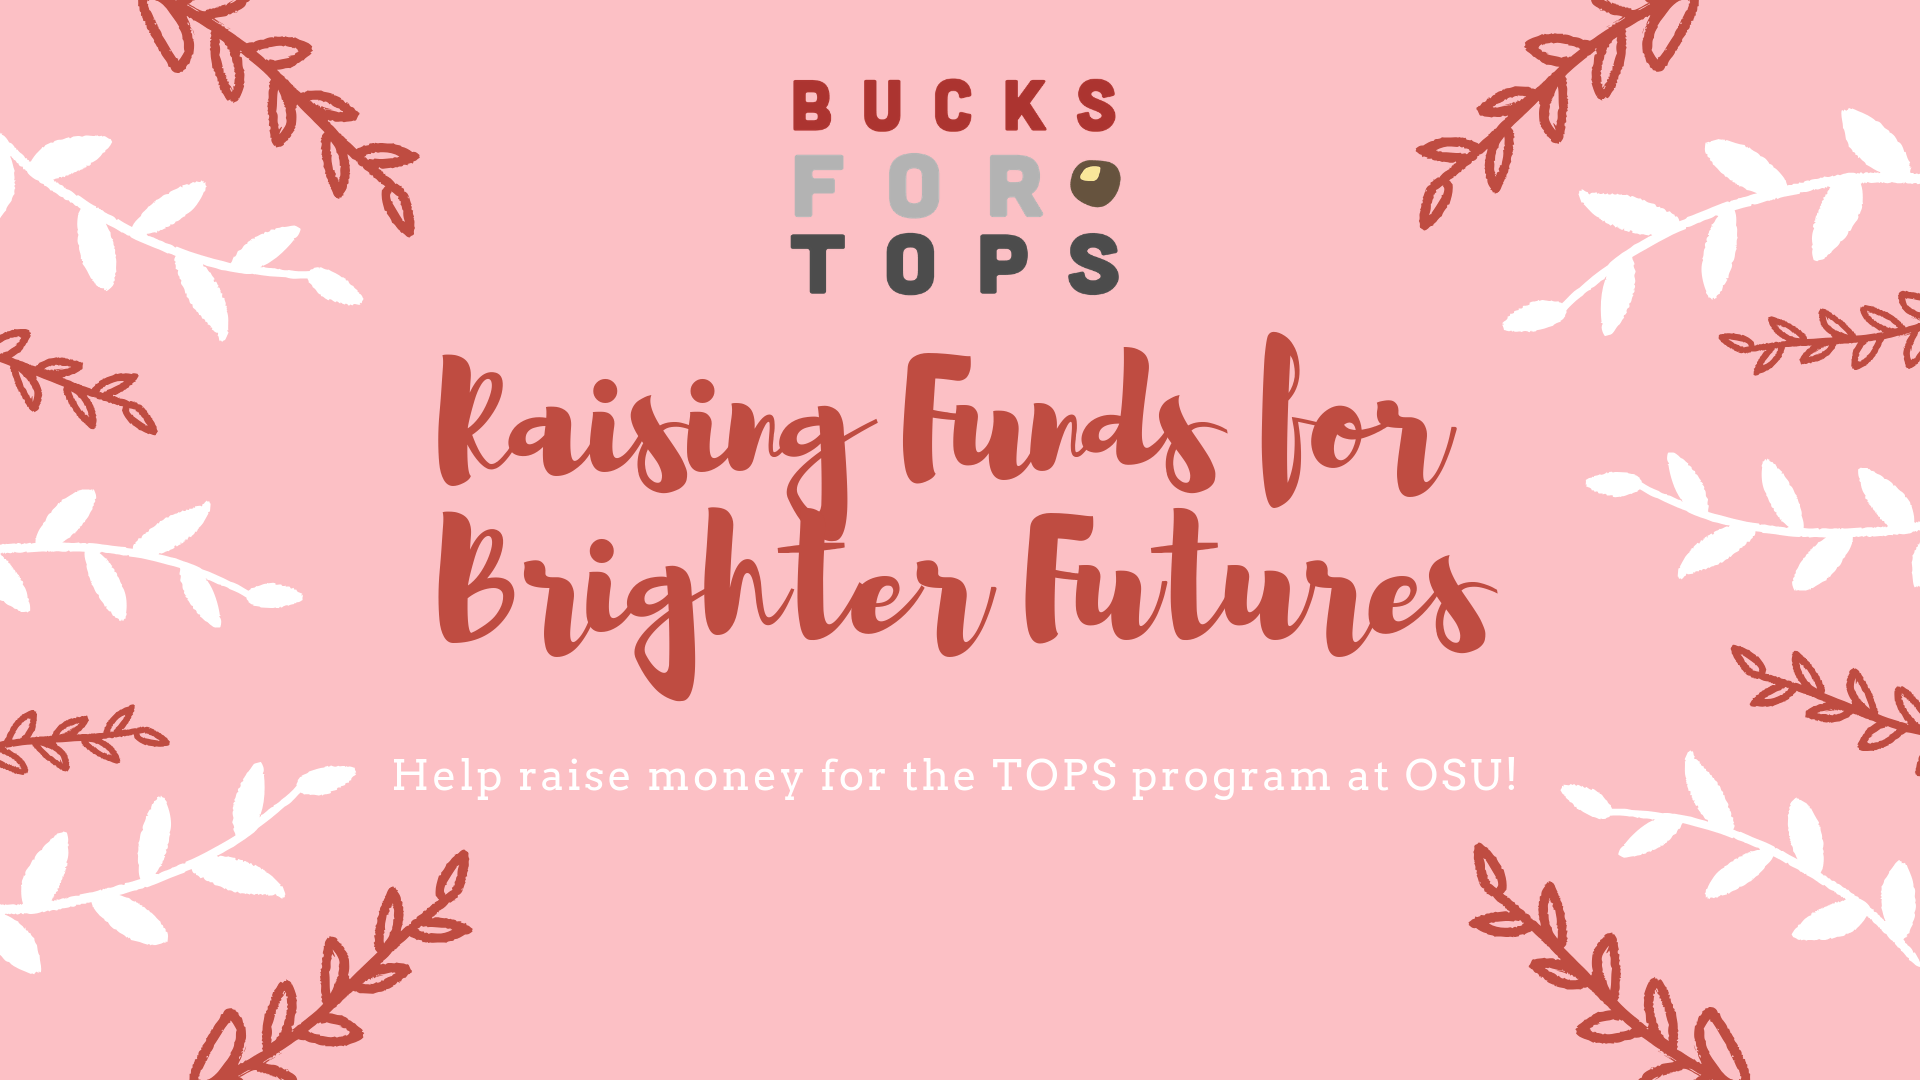 Bucks For TOPS at The Ohio State University